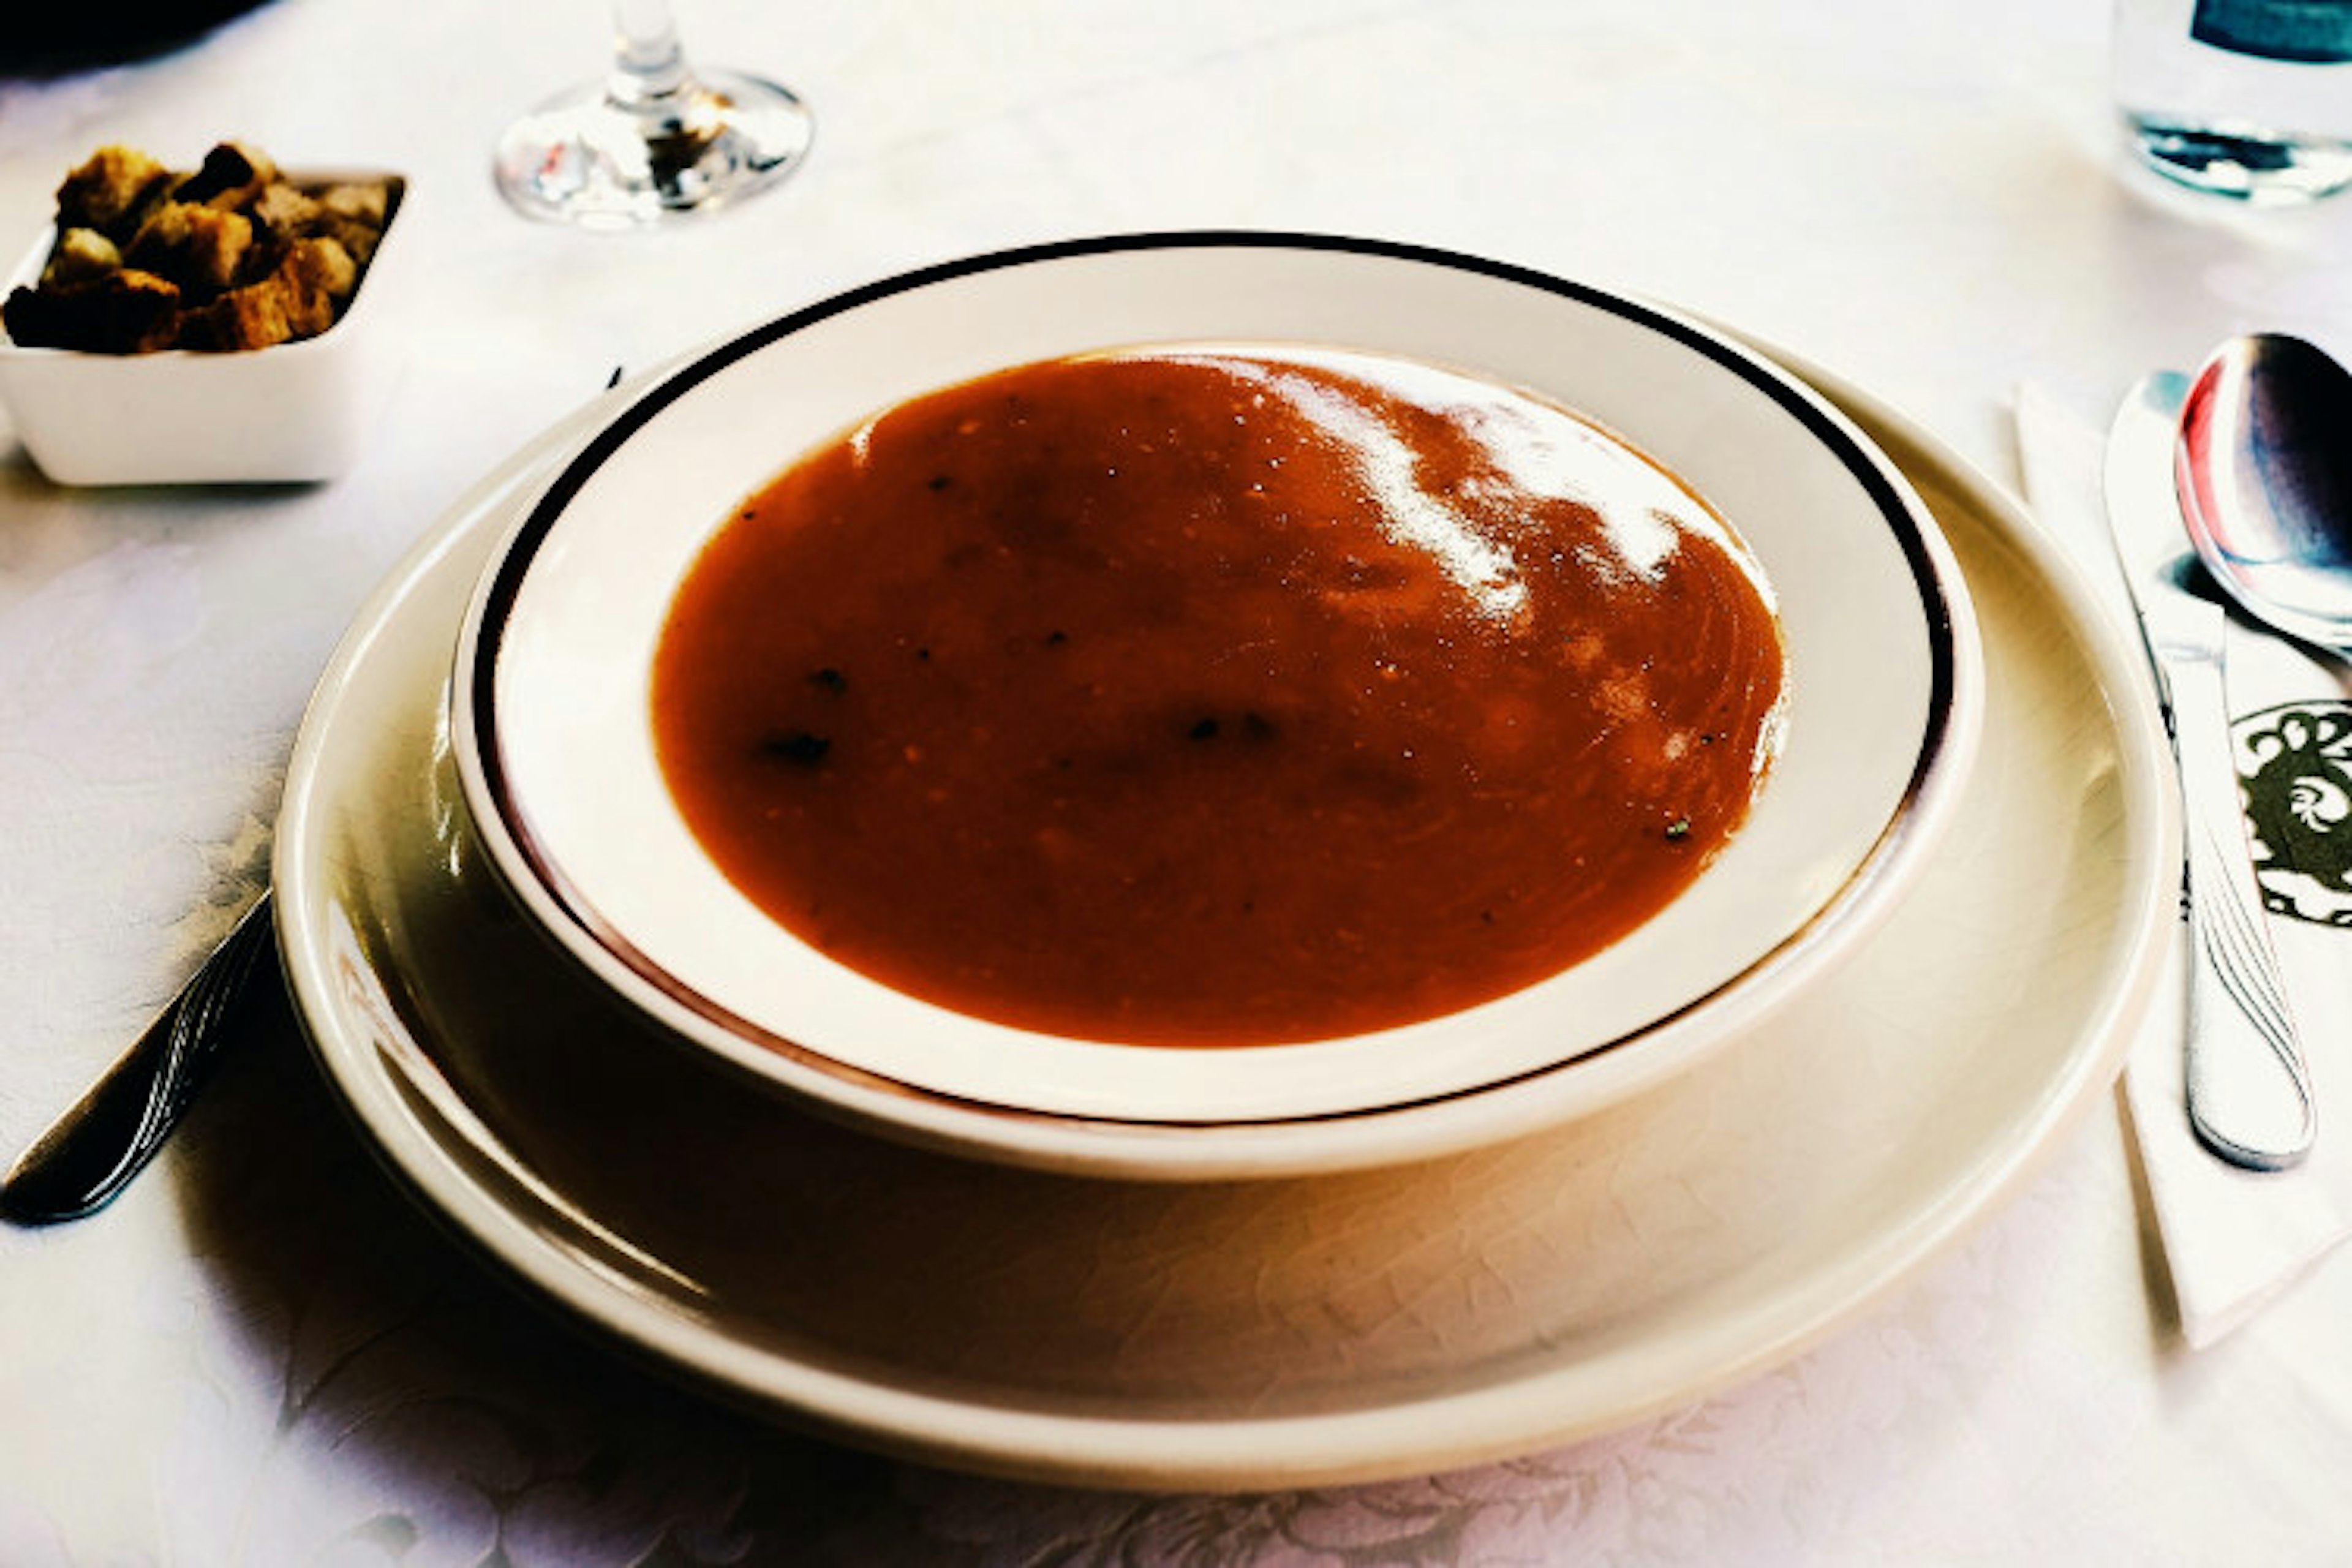 Tomato soup featured as ‘Dracula’s Blood’ in Sighişoara. Image by Mark Baker / Lonely Planet